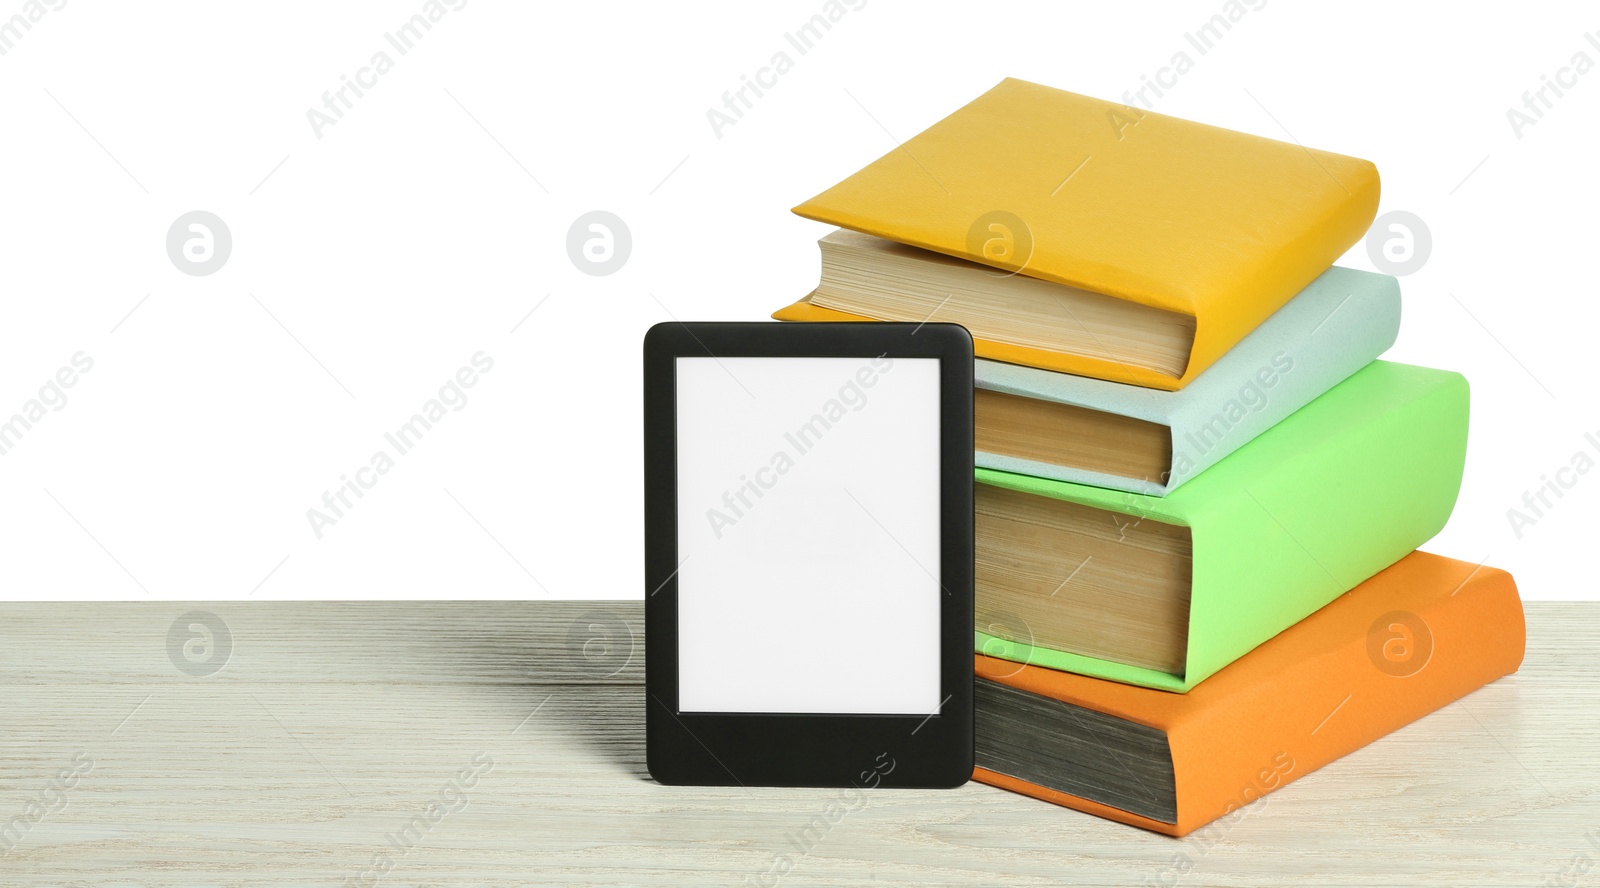 Photo of Stack of hardcover books and modern e-book on wooden table against white background. Space for text